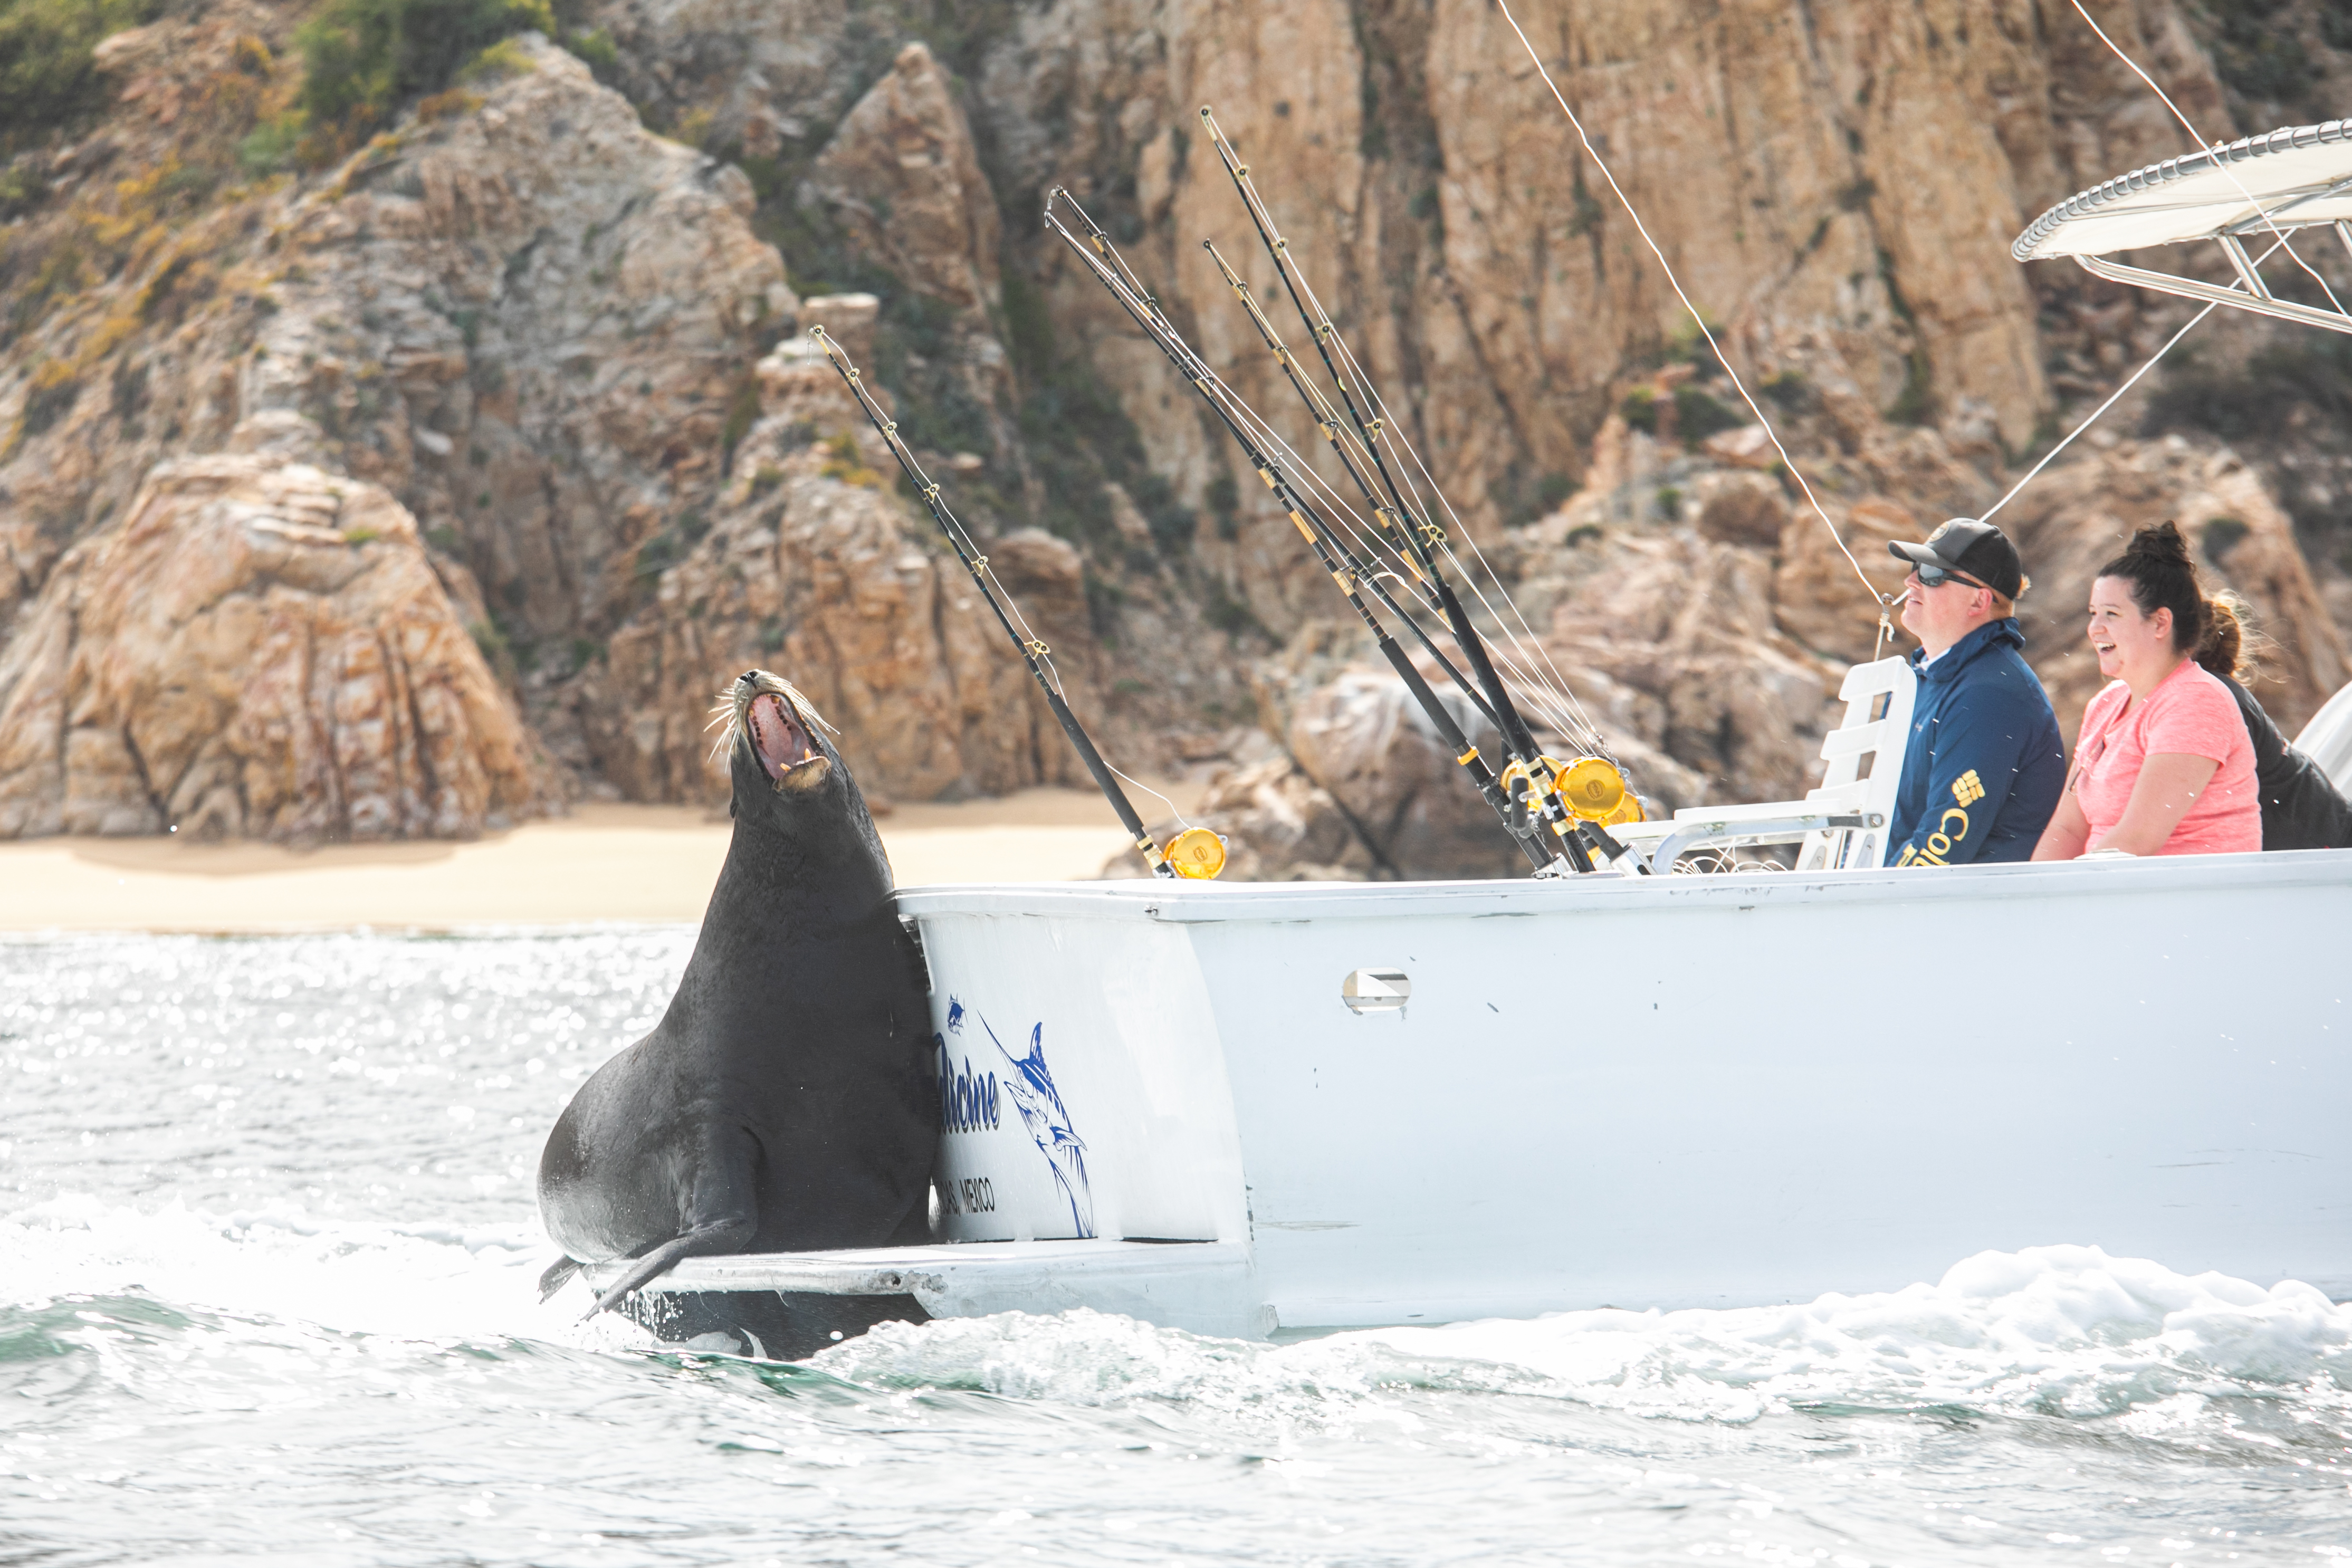 Sea lion on back of fishing boat near Cabo San Lucas. Photo by Kate Holt